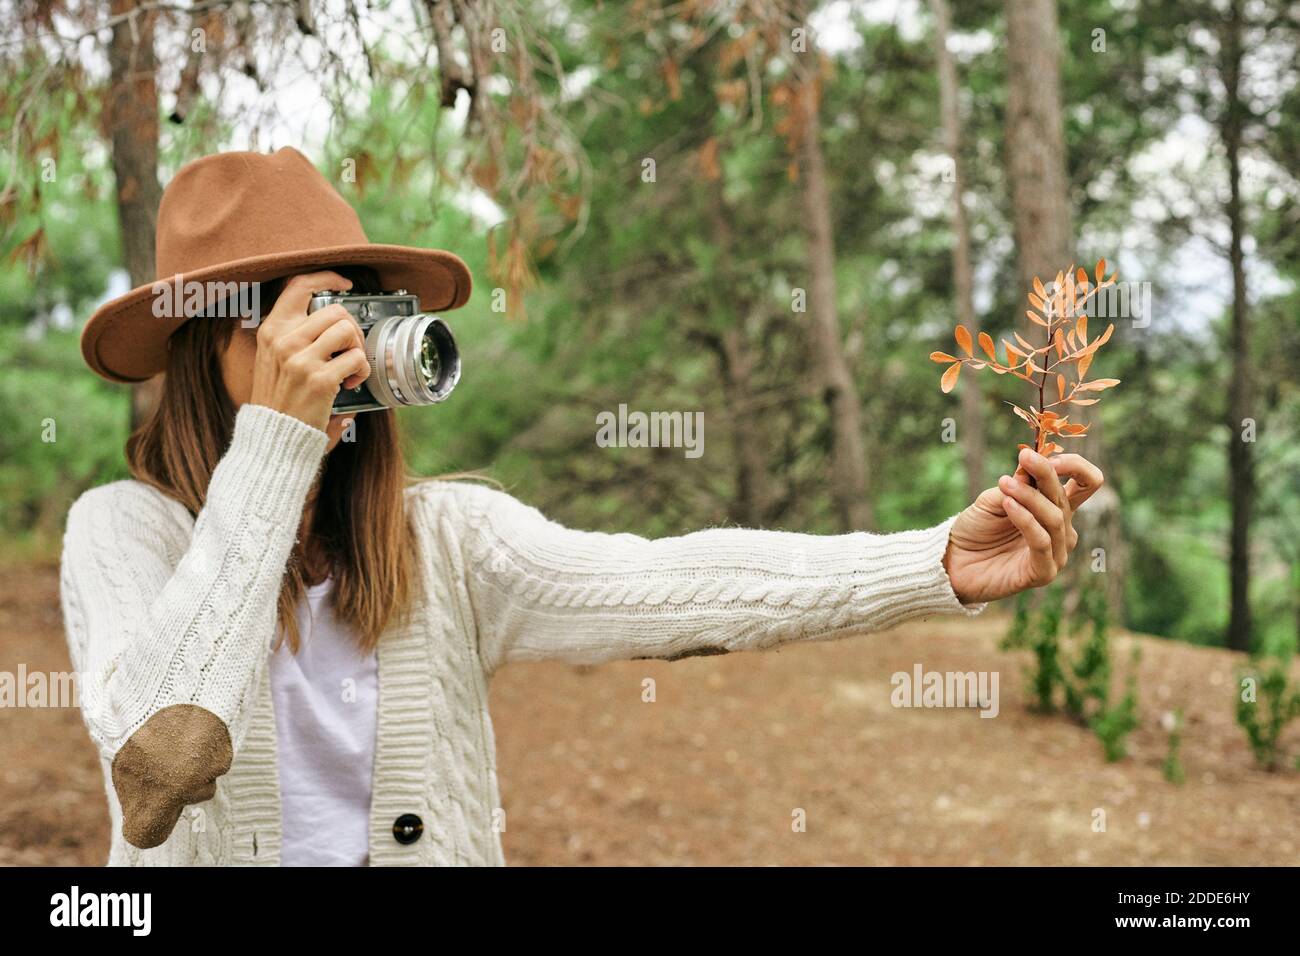 Woman photographing Pistacia Lentiscus leaves through vintage camera in forest Stock Photo